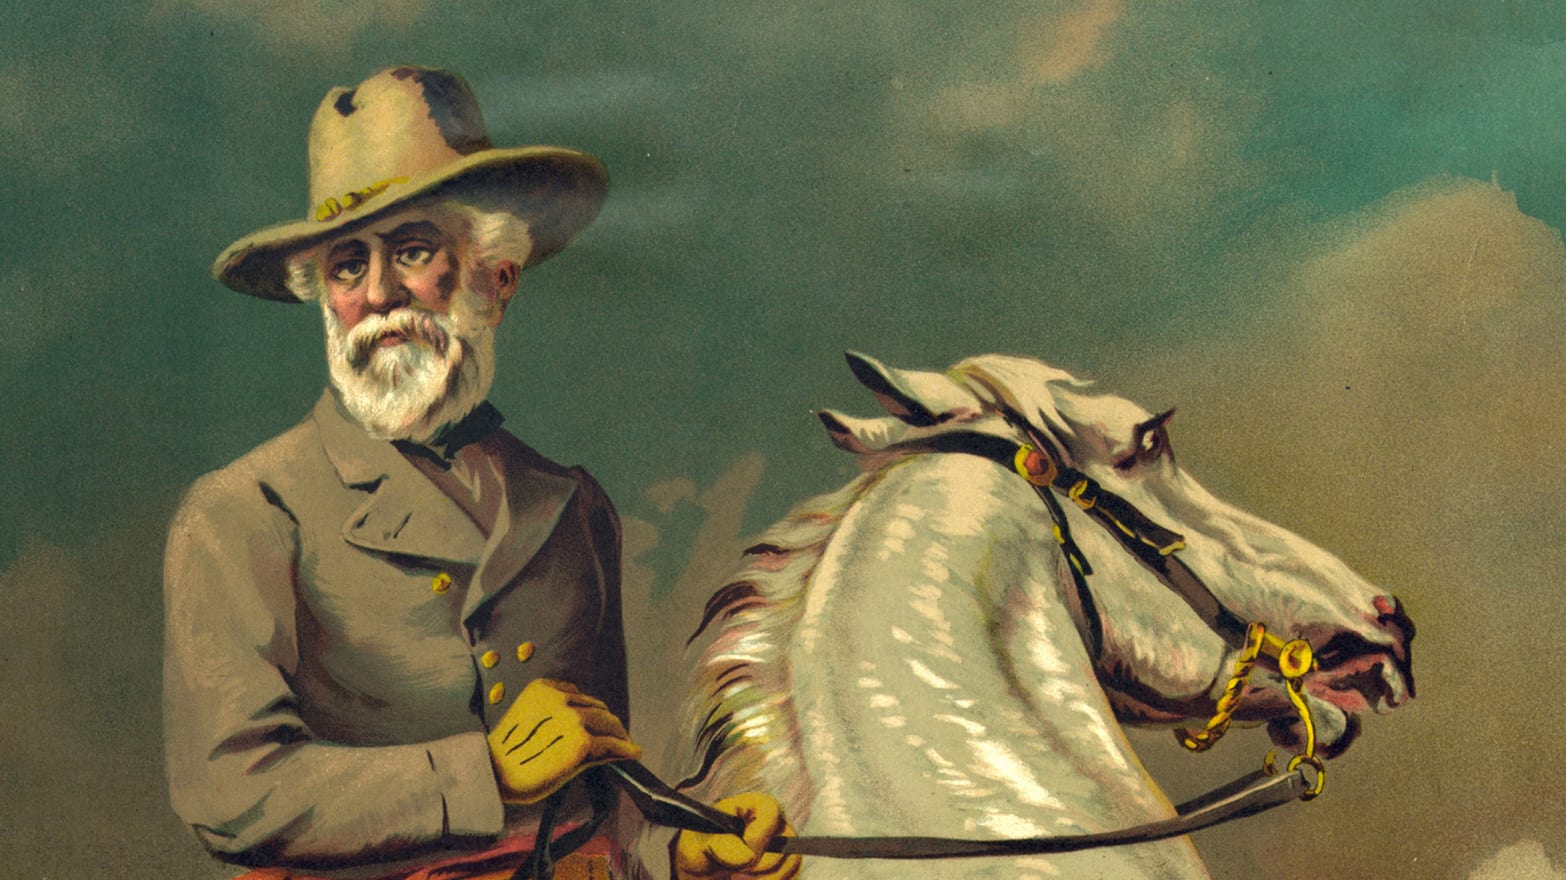 When Robert E. Lee Met John Brown and Saved the Union